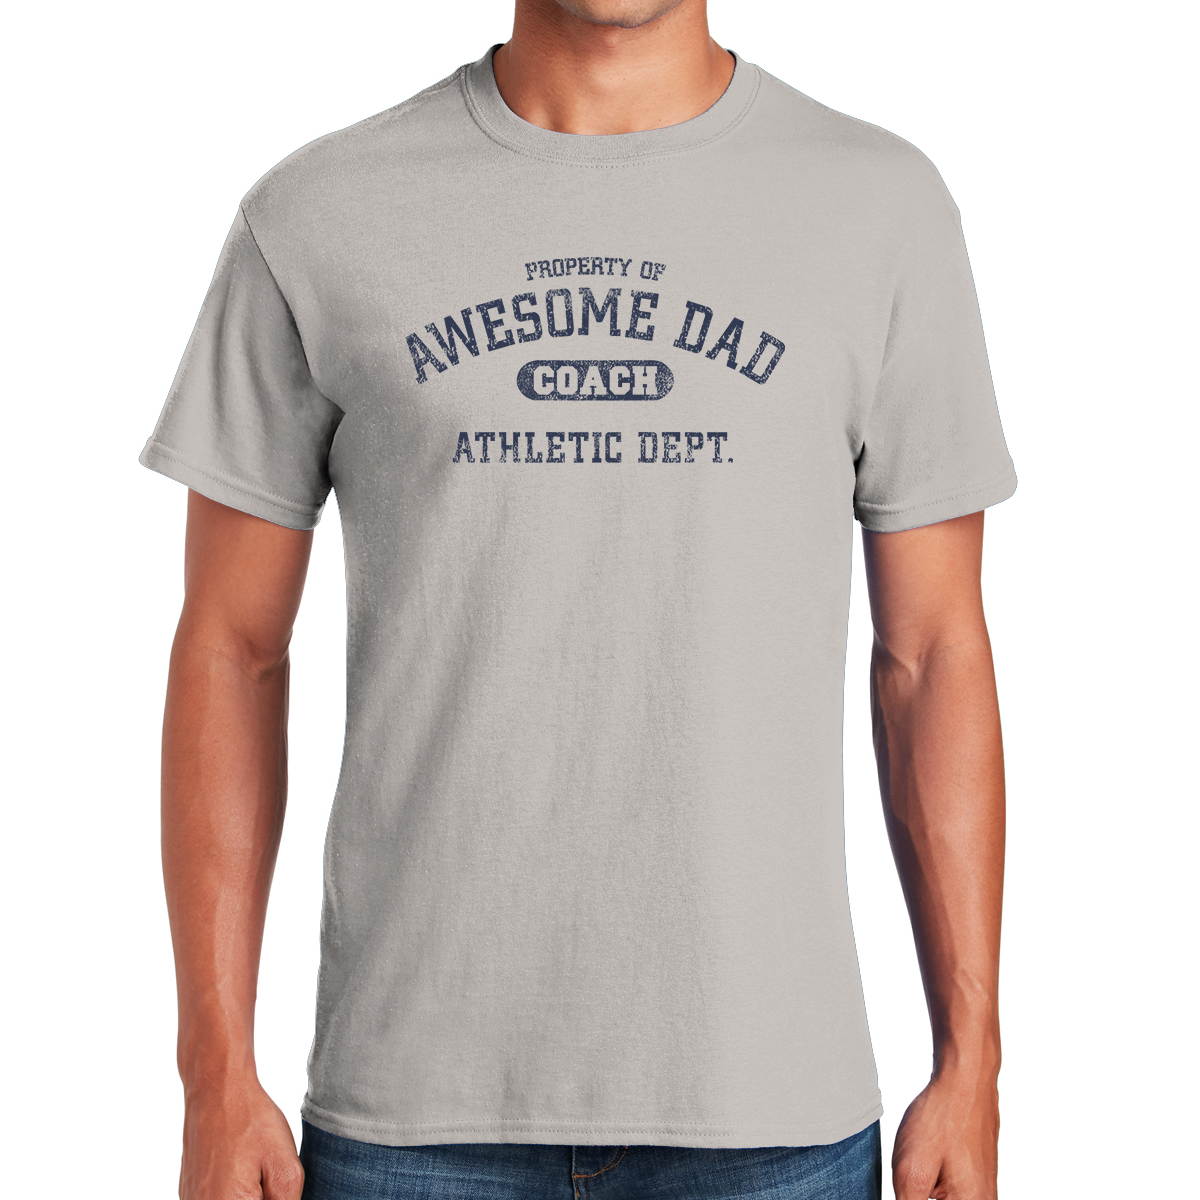 Property Of Awesome Dad Coach Athletic Dept. Gifts for Dads T-shirt